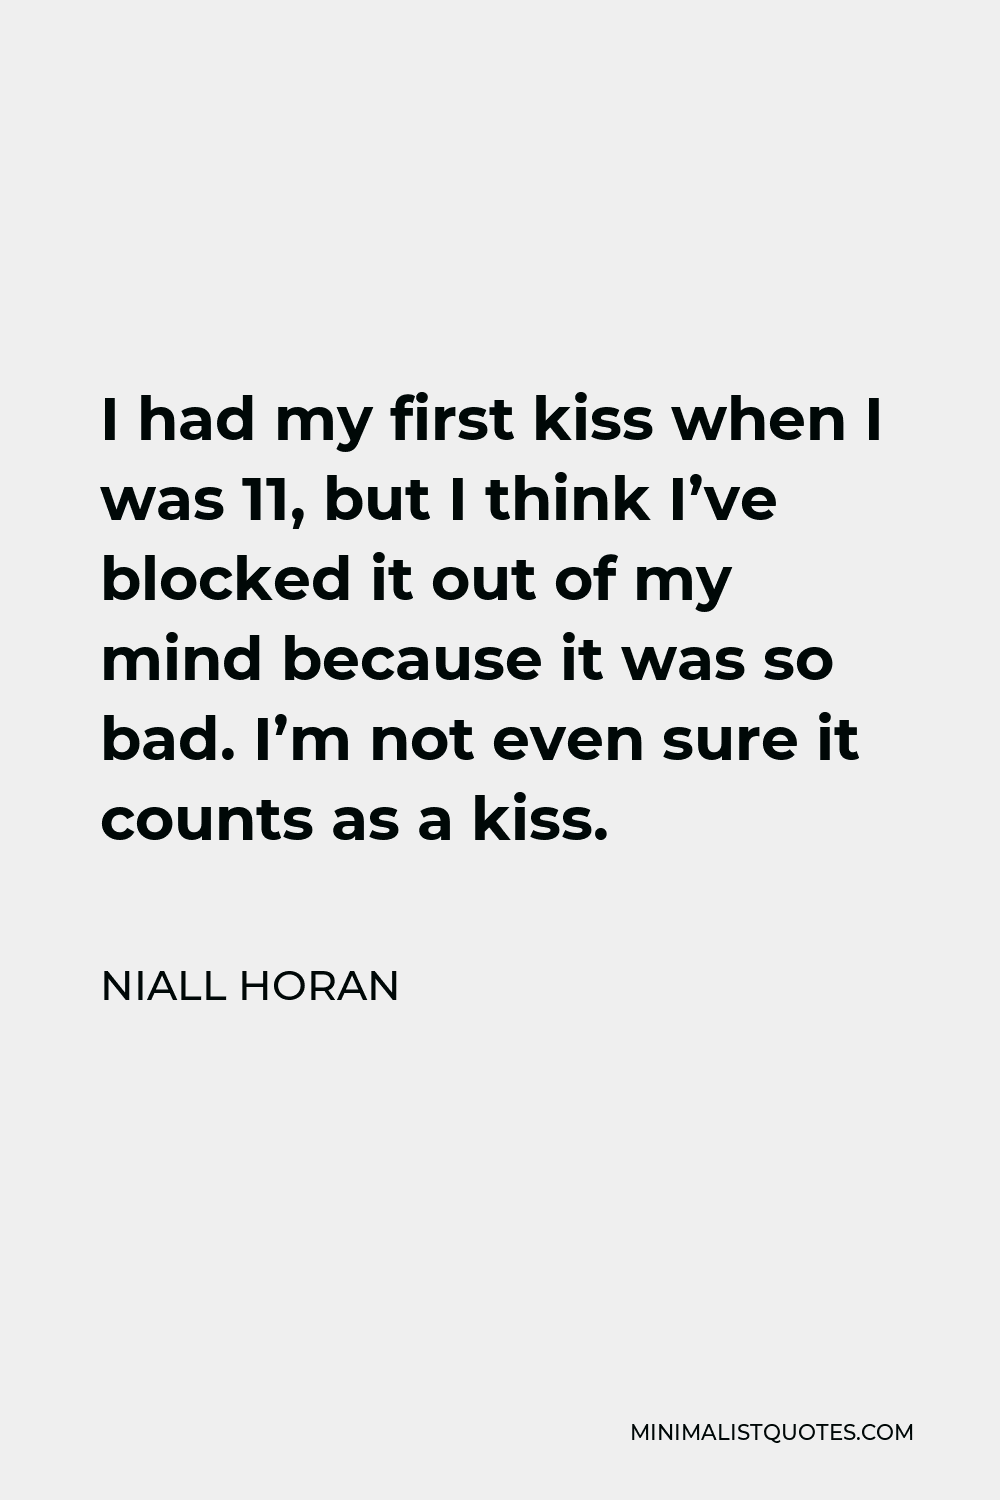 Niall Horan Quote - I had my first kiss when I was 11, but I think I’ve blocked it out of my mind because it was so bad. I’m not even sure it counts as a kiss.